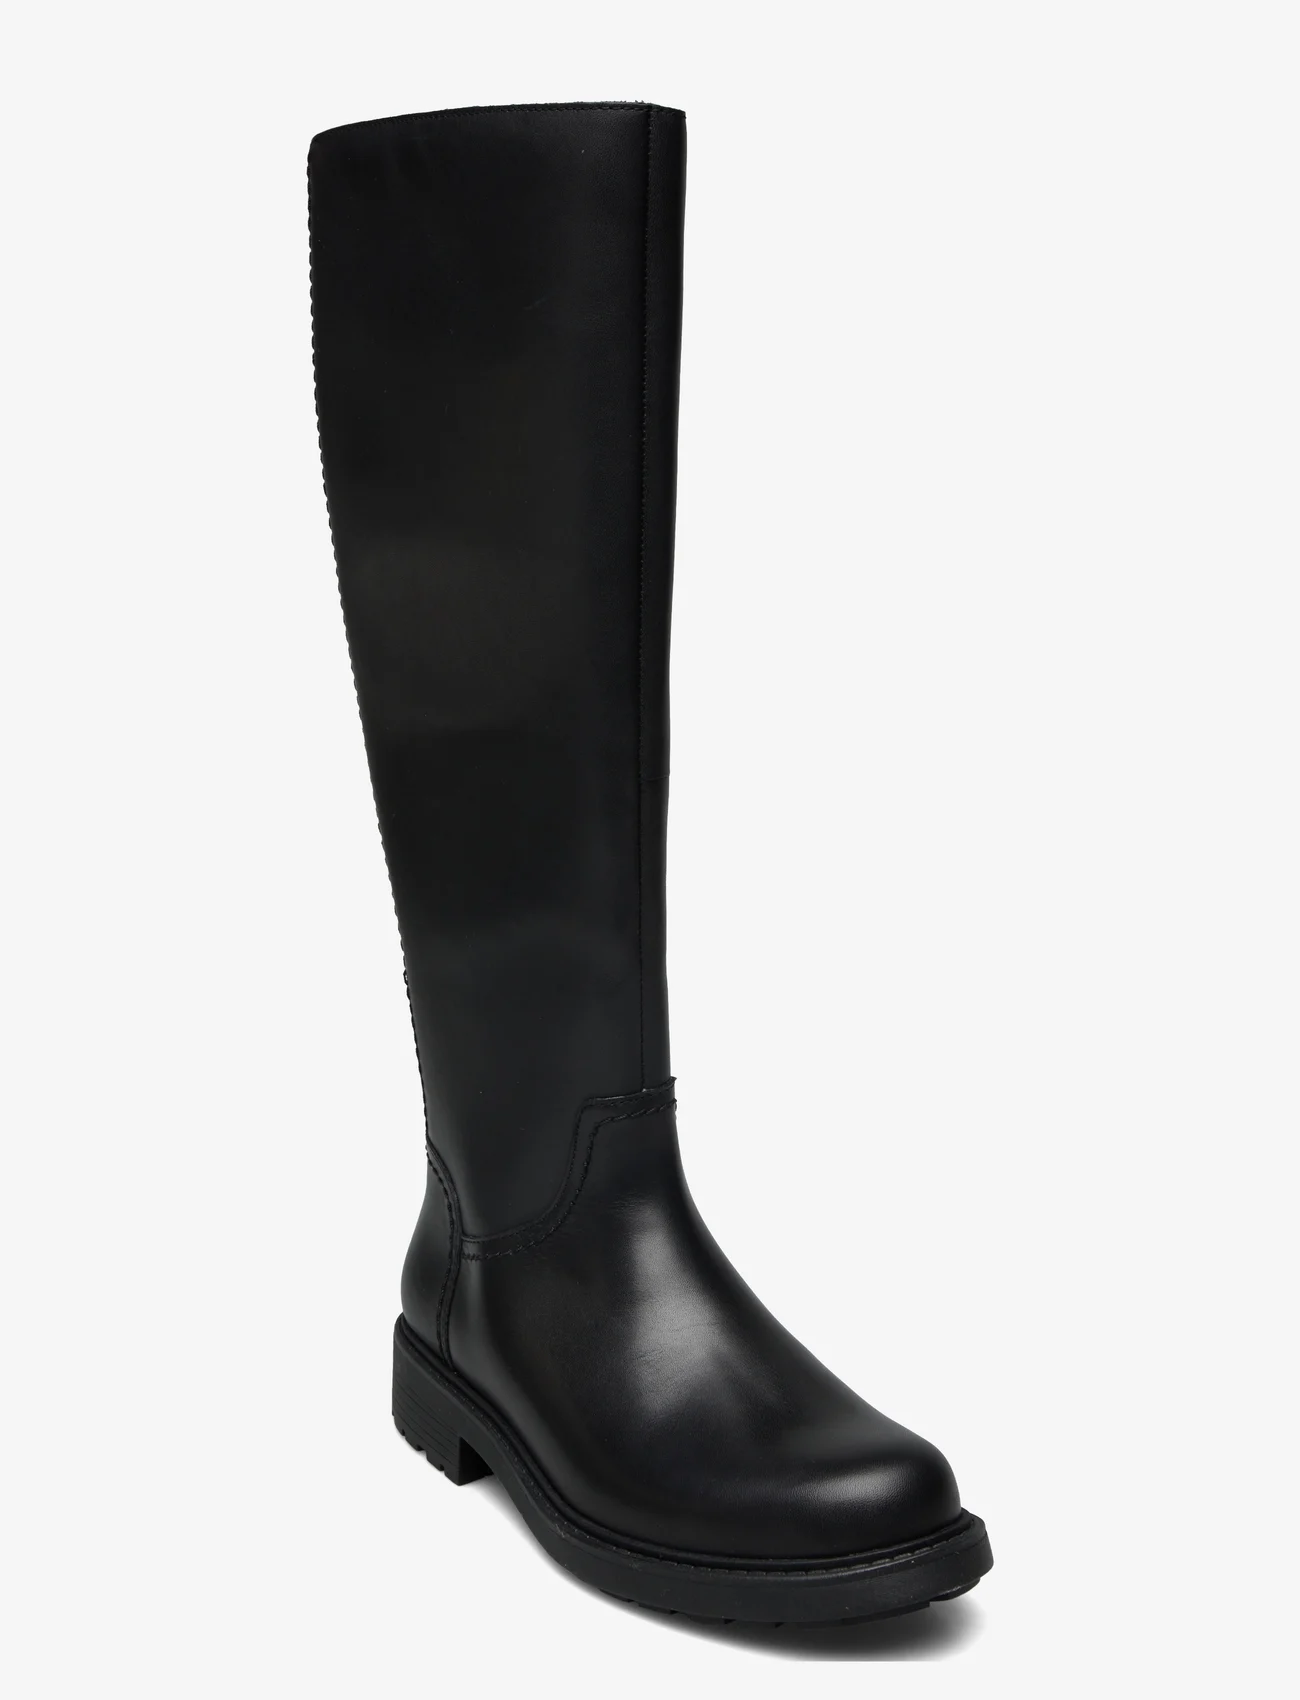 Clarks - Orinoco2 Rise - knee high boots - black leather - 0